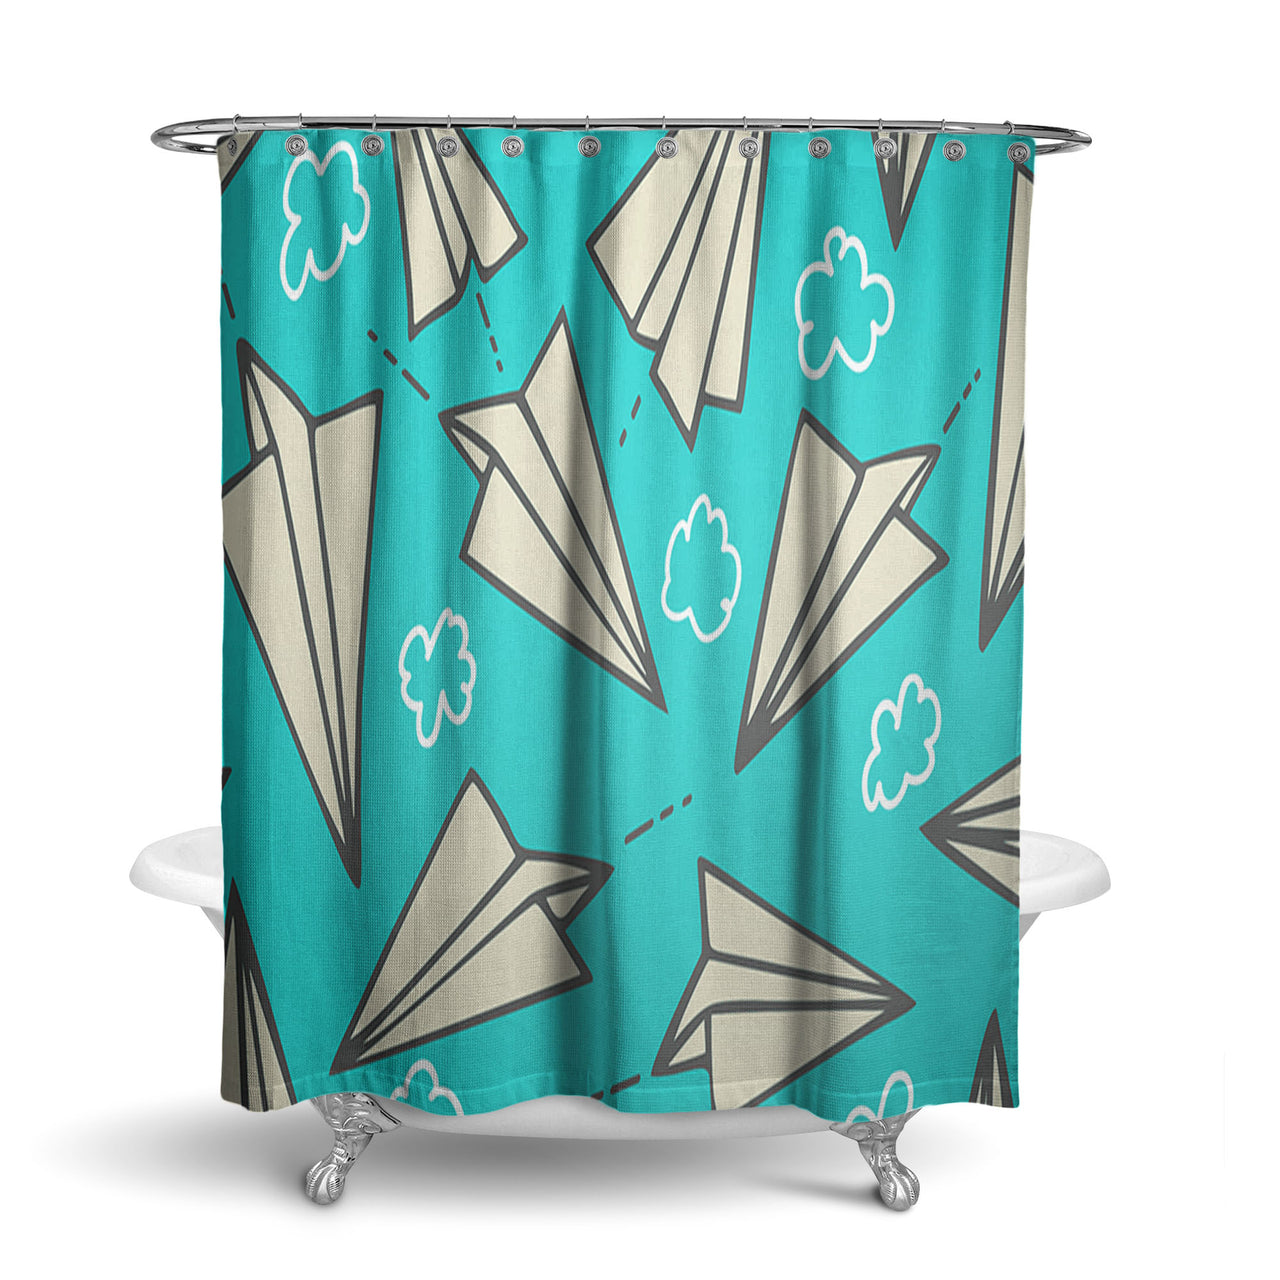 Super Cool Paper Airplanes Designed Shower Curtains